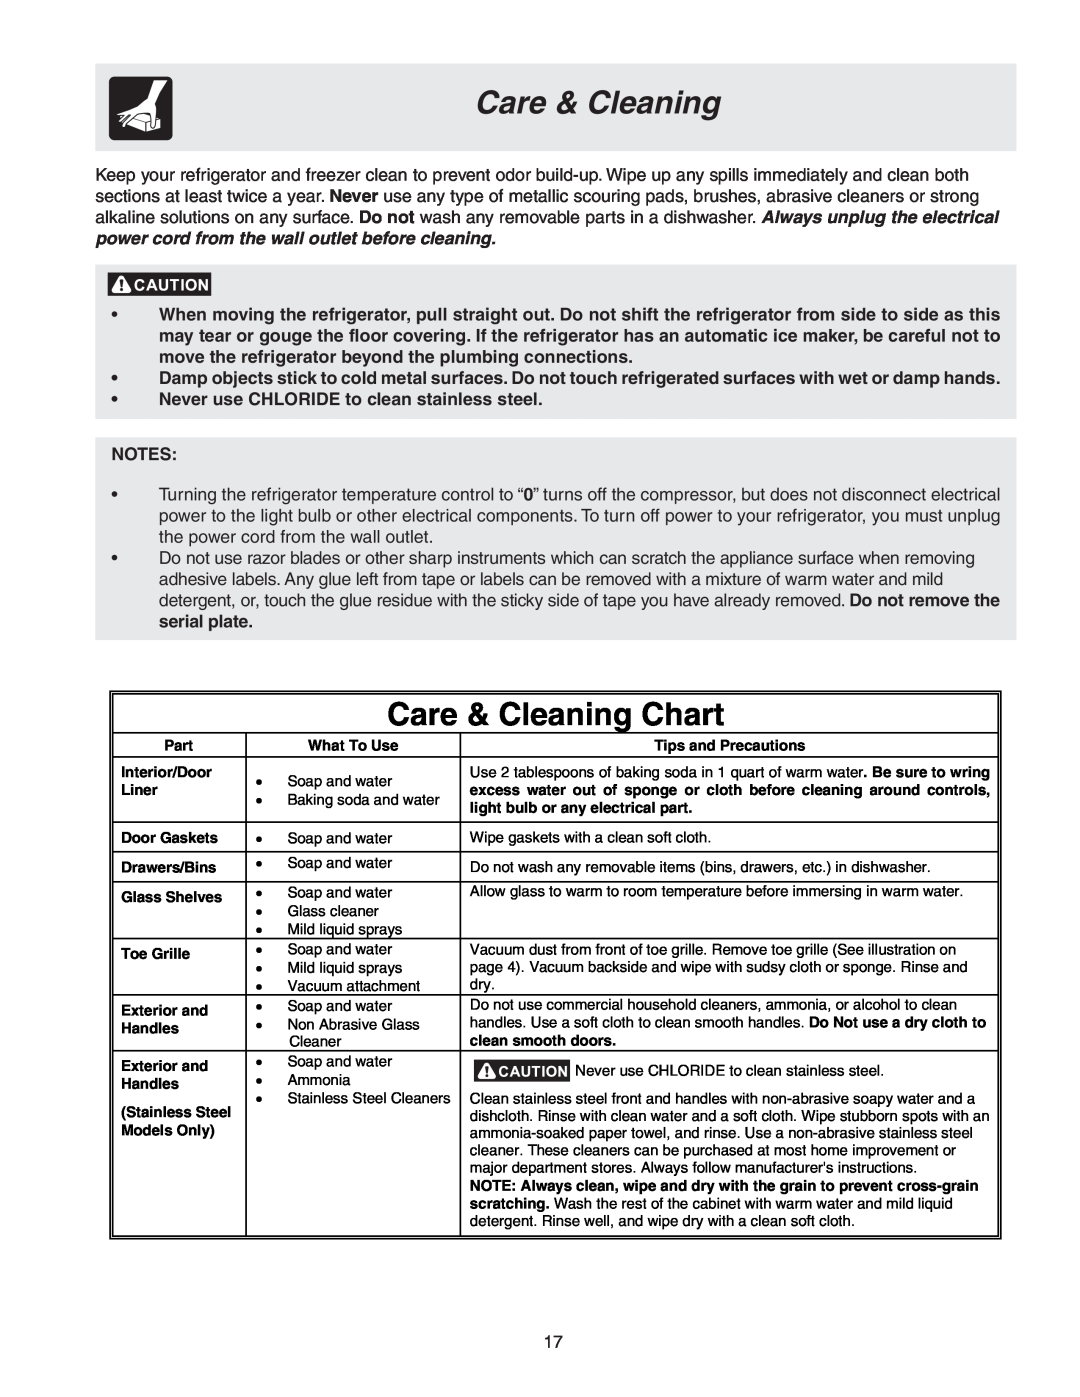 Frigidaire GLRT218WDS7, GLRT218WDL2, GLRT218WDS9 Care & Cleaning Chart, Never use CHLORIDE to clean stainless steel 